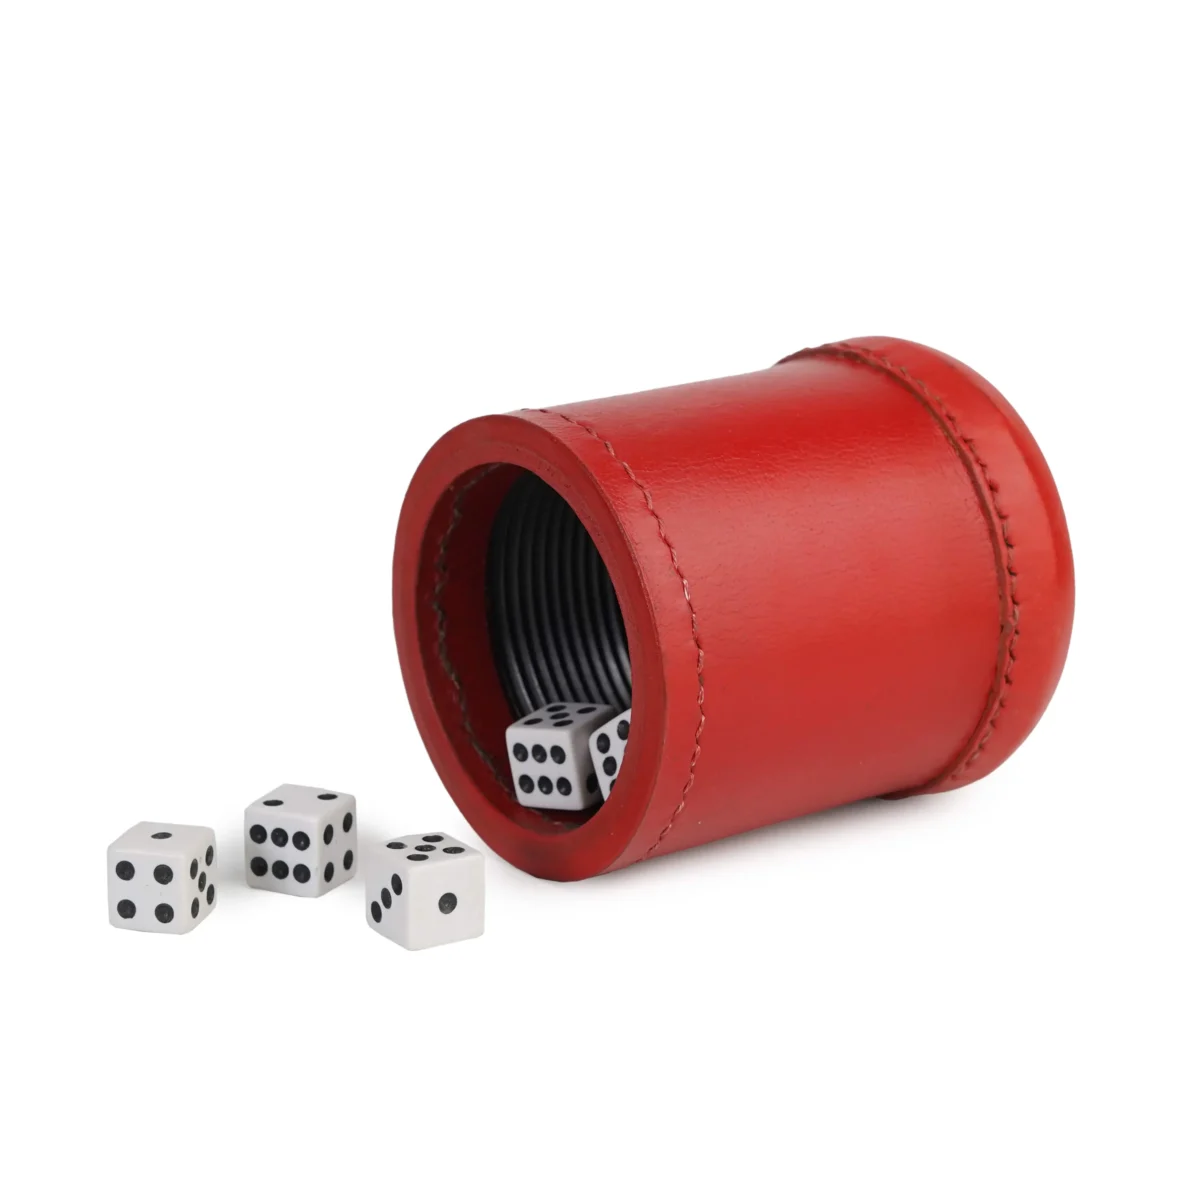 red leather dice cups, leather dice cups for board games